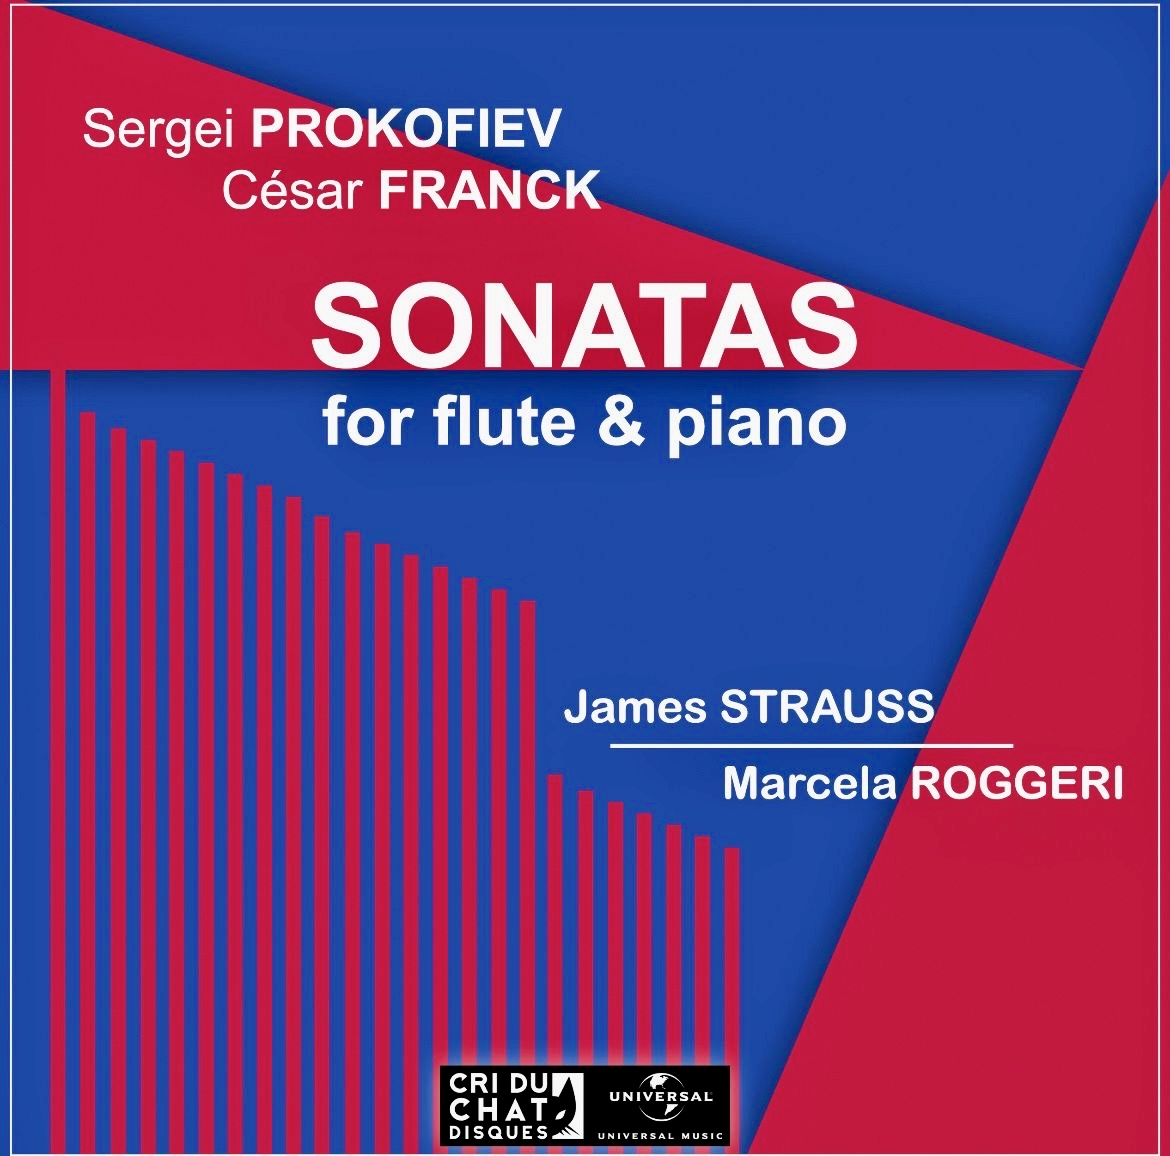 <big>"Sonatas for flute and piano" with flutist James Strauss</big>